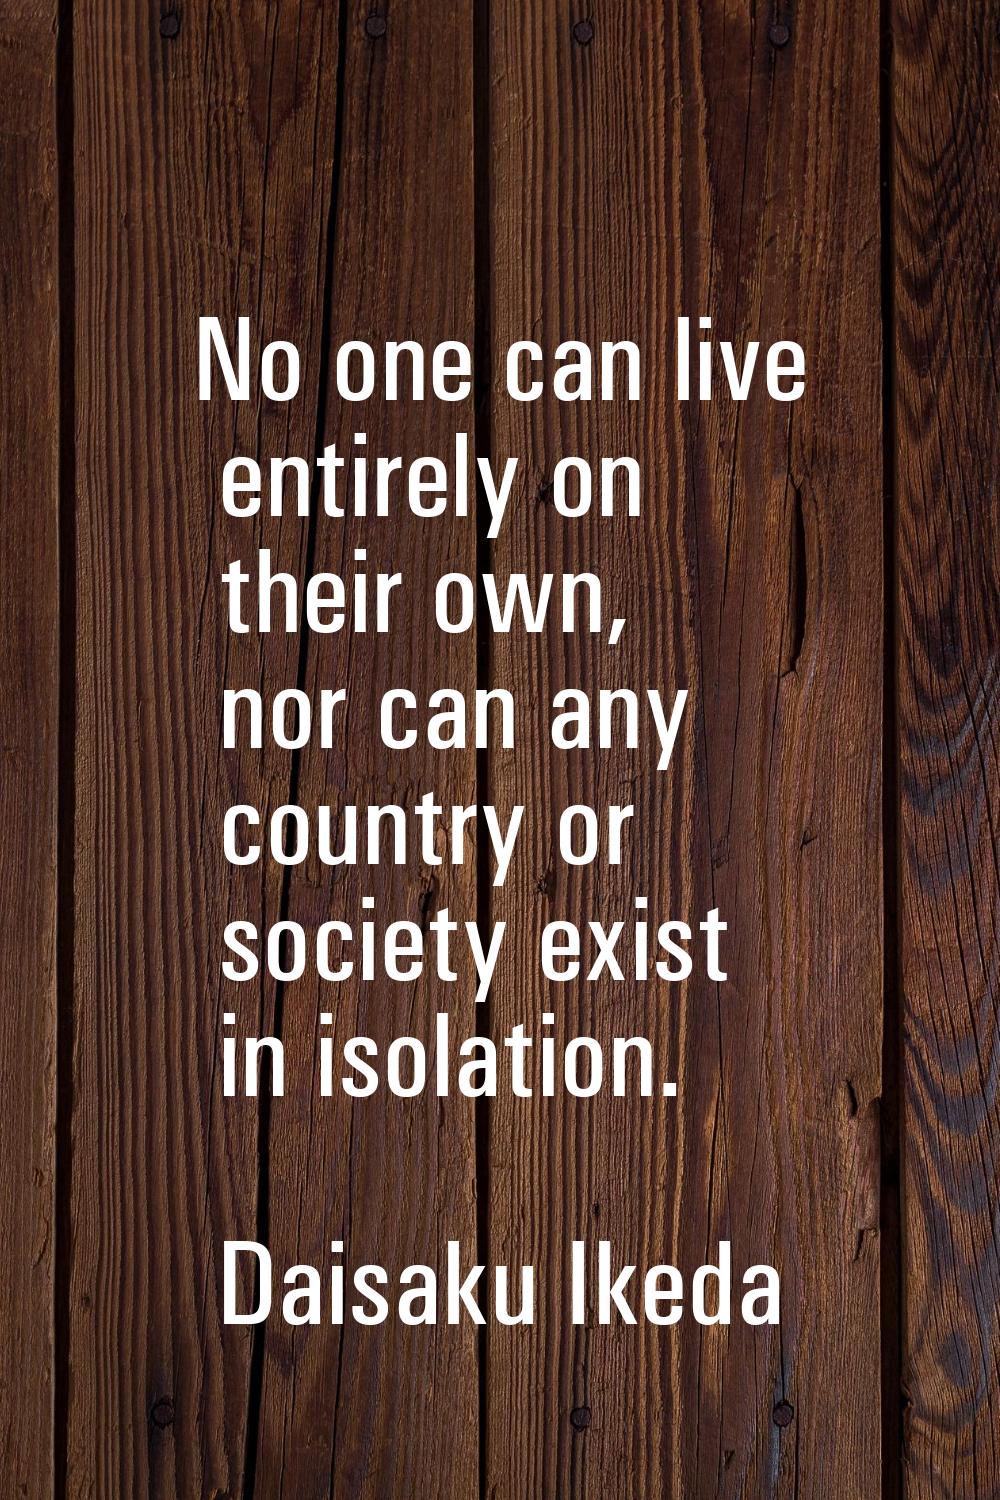 No one can live entirely on their own, nor can any country or society exist in isolation.